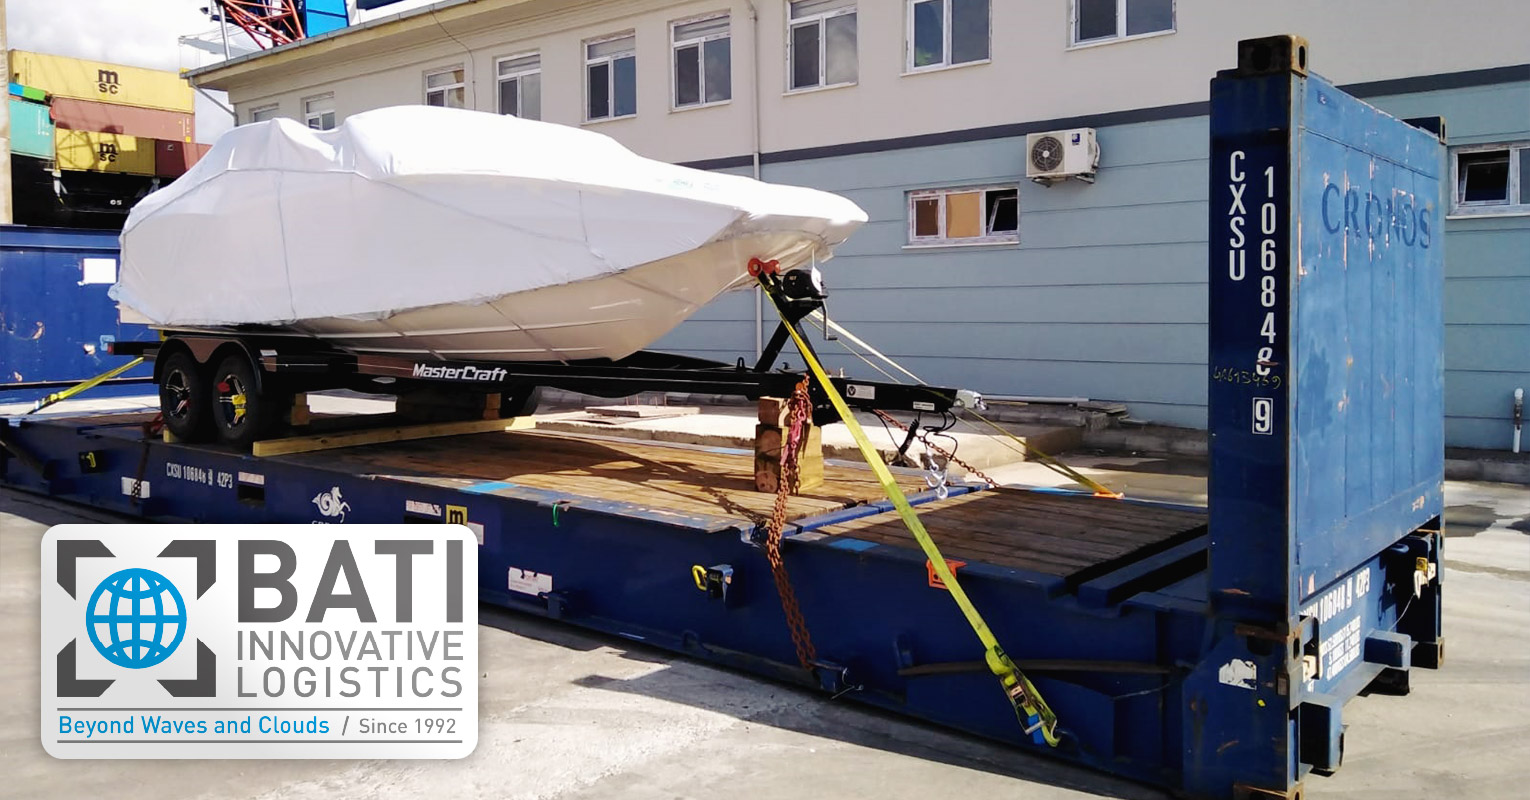 Bati Group Delivered a Mastercraft from USA to Turkey